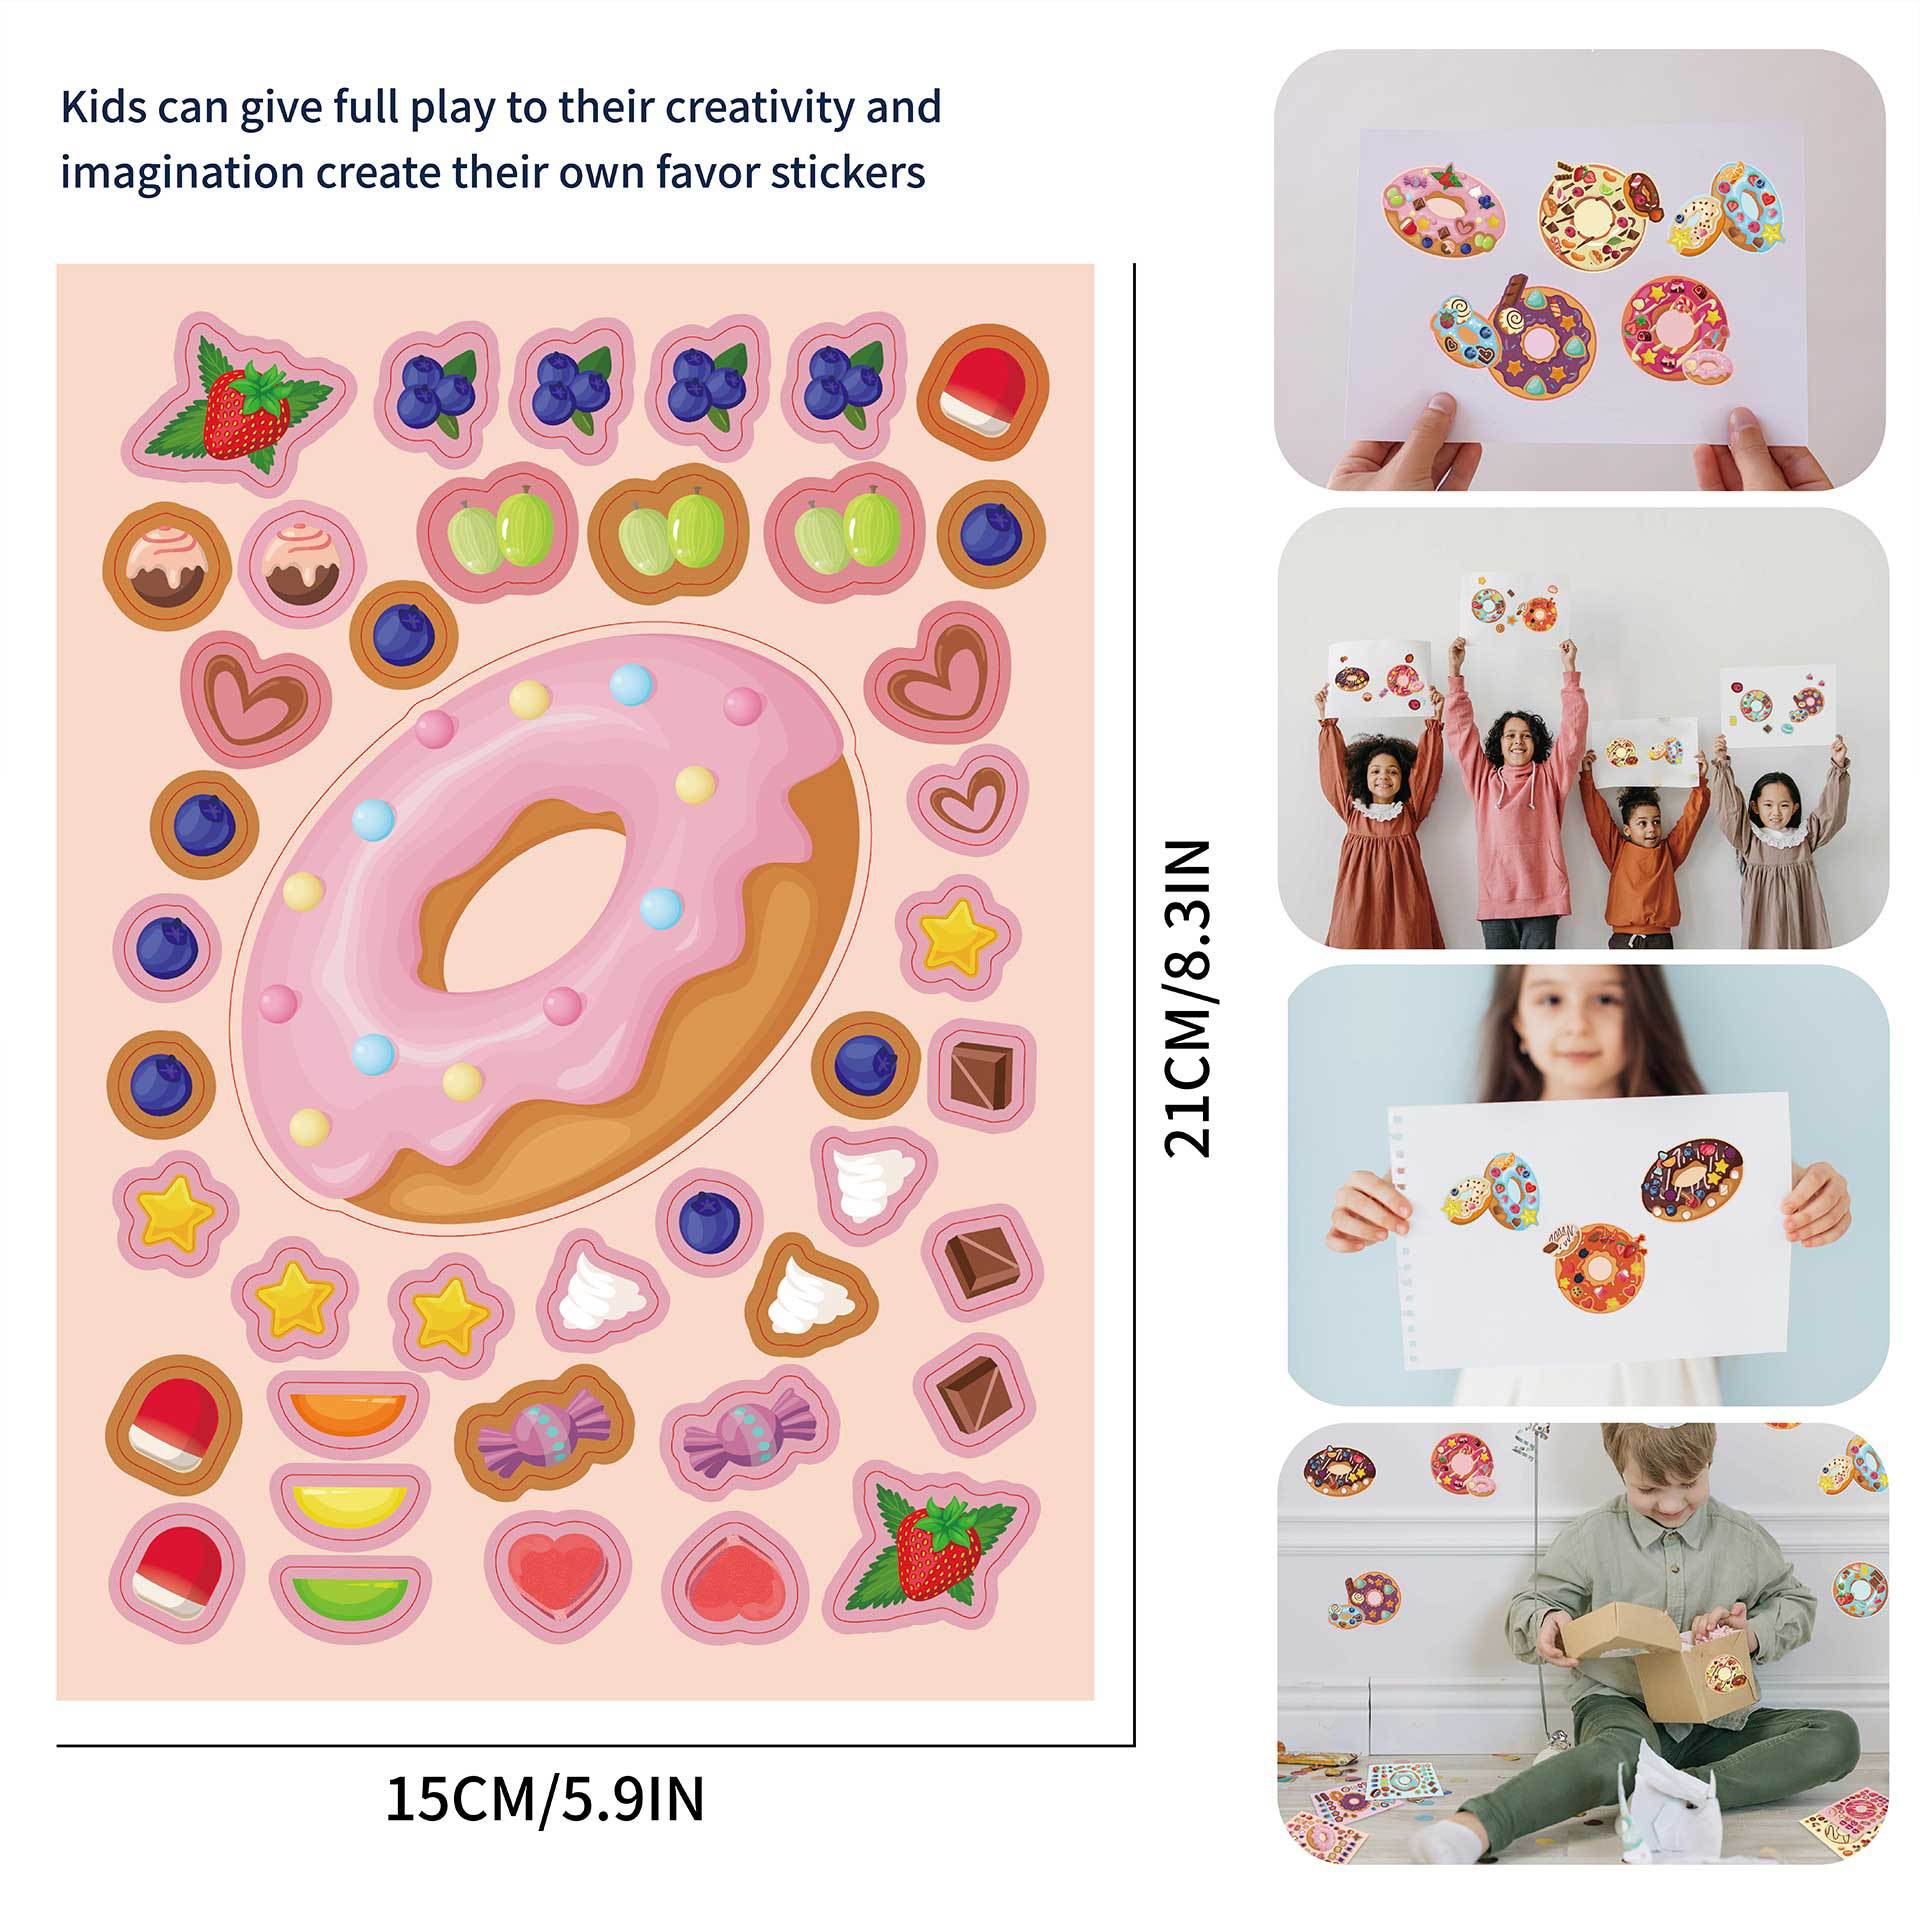 32 Sheets Donuts Make Your Own Stickers for Kids - TTpen